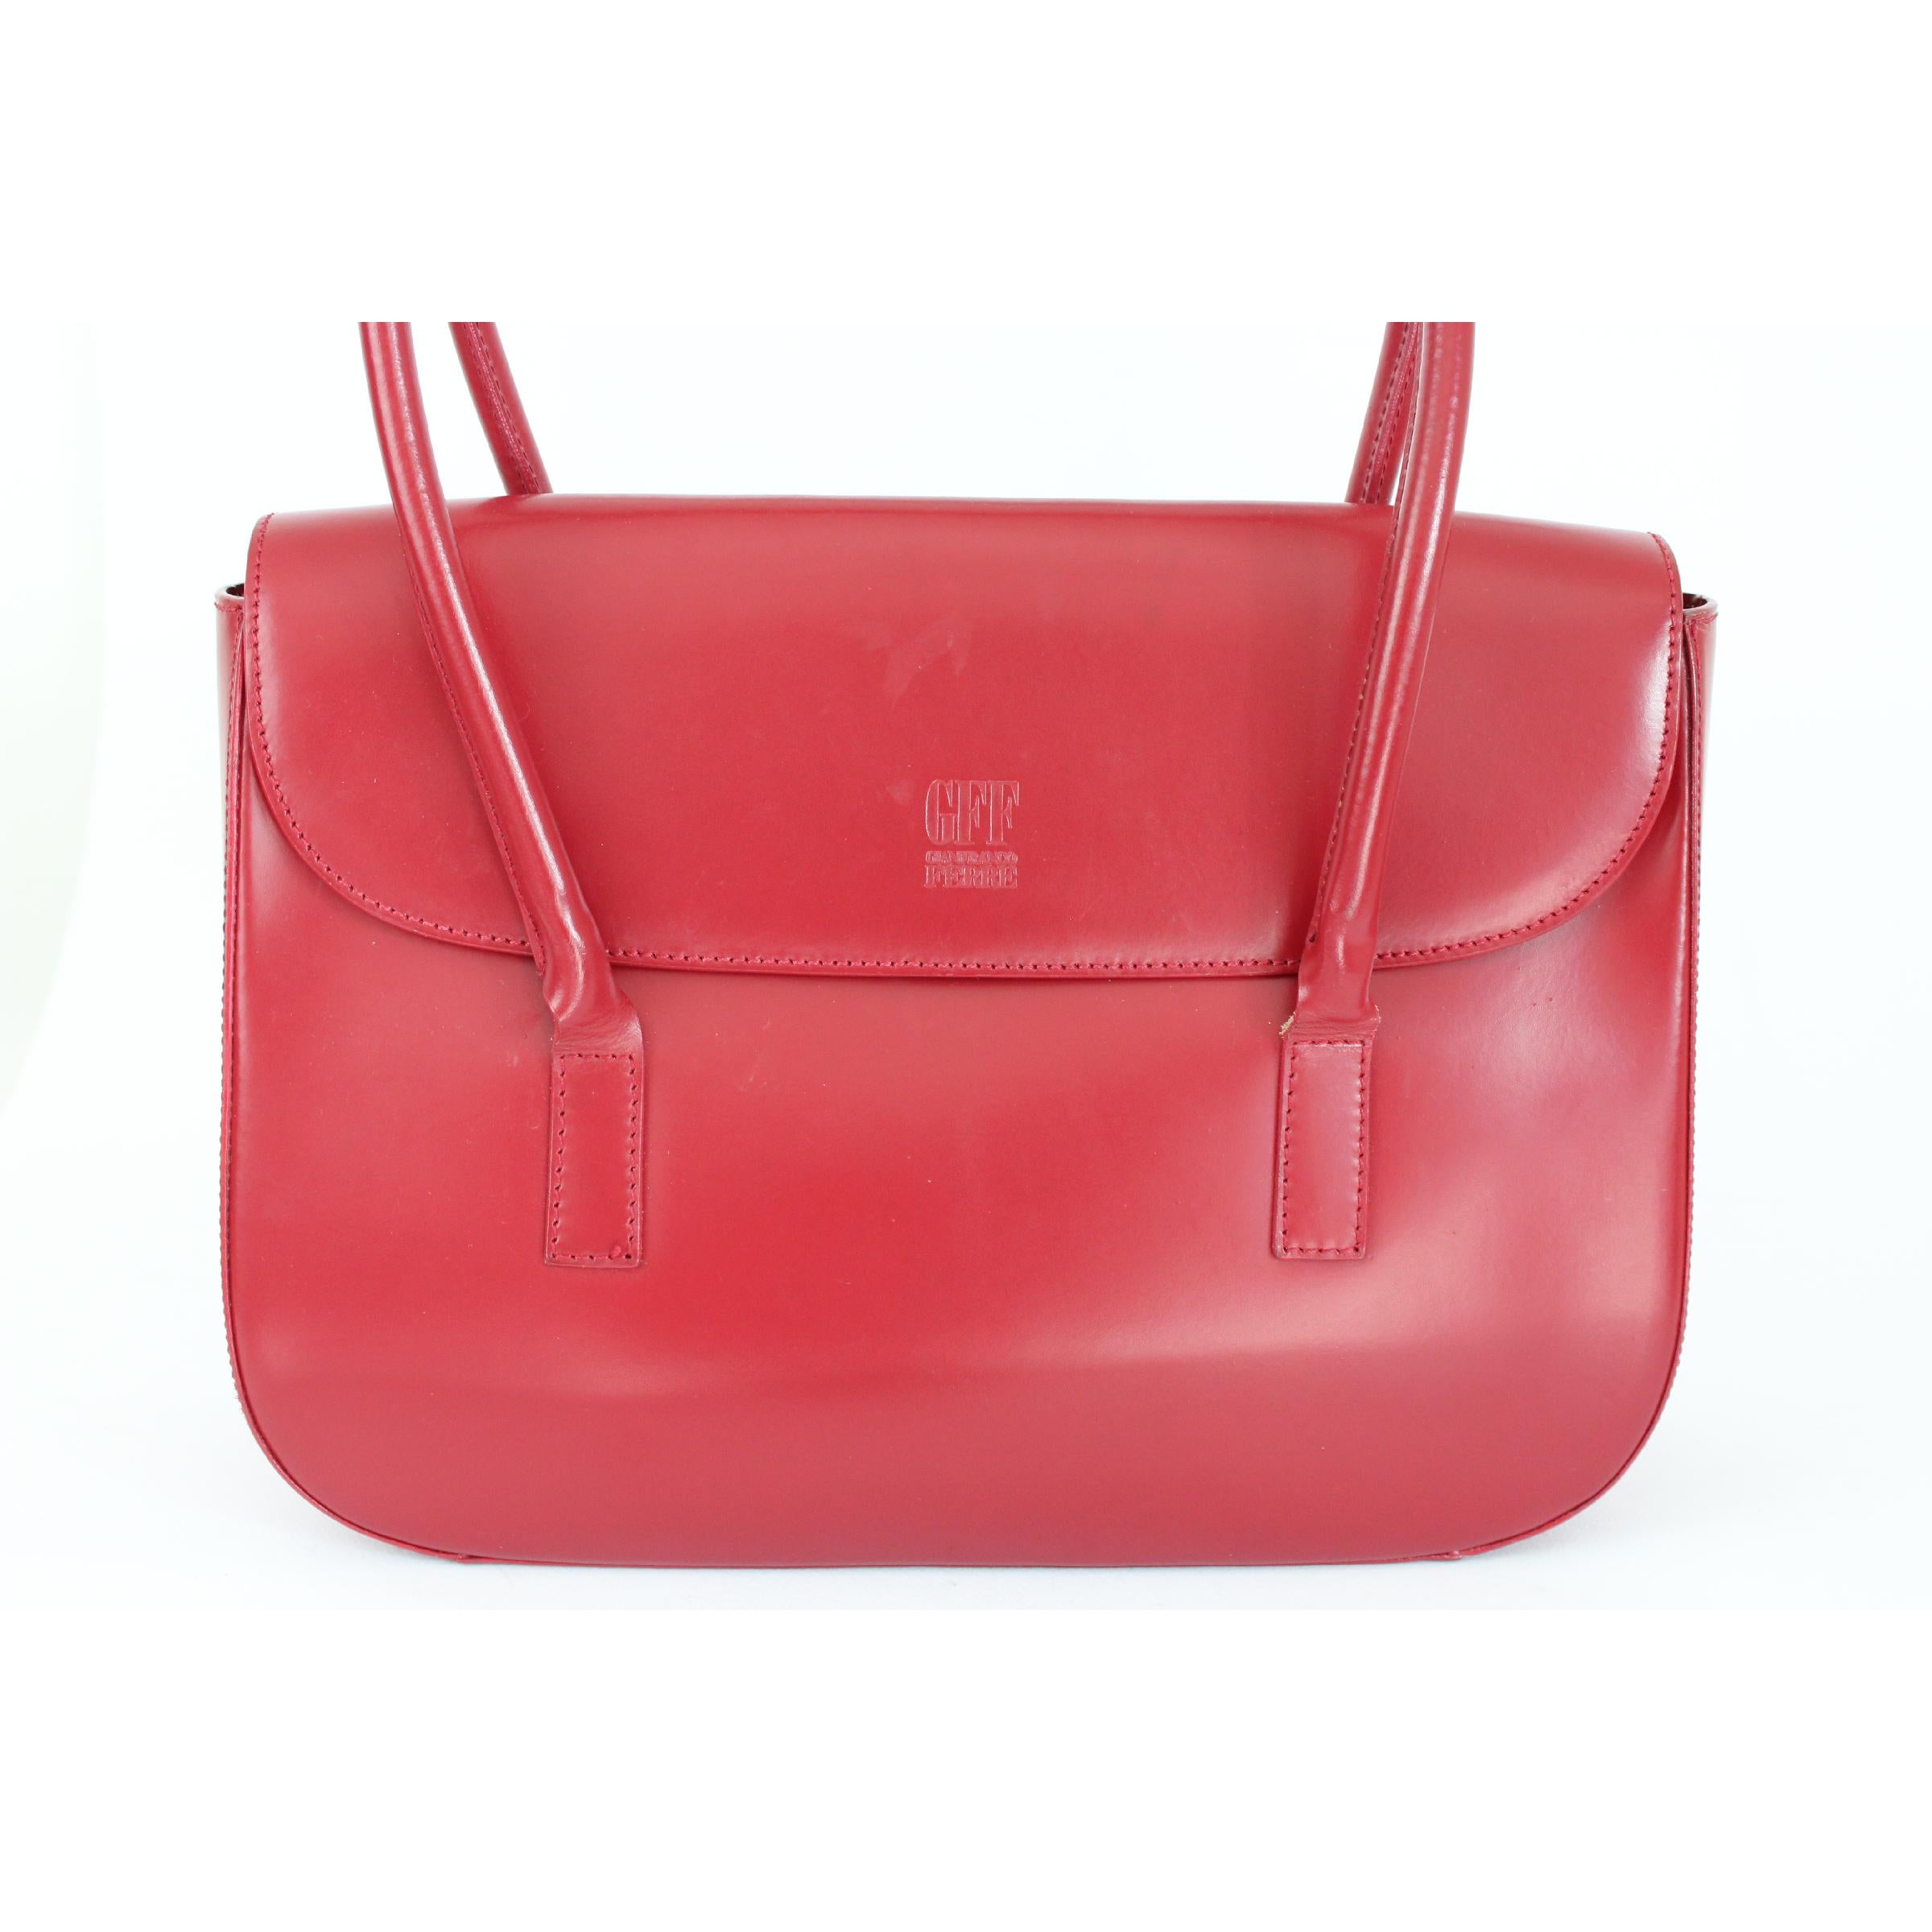 Gianfranco Ferre vintage shoulder bag, red, in 100% leather. Inside pocket. Clip closure. 1970s. Made in Italy. Excellent vintage conditions.

Height: 25 cm
Width: 33 cm
Depth: 10 cm